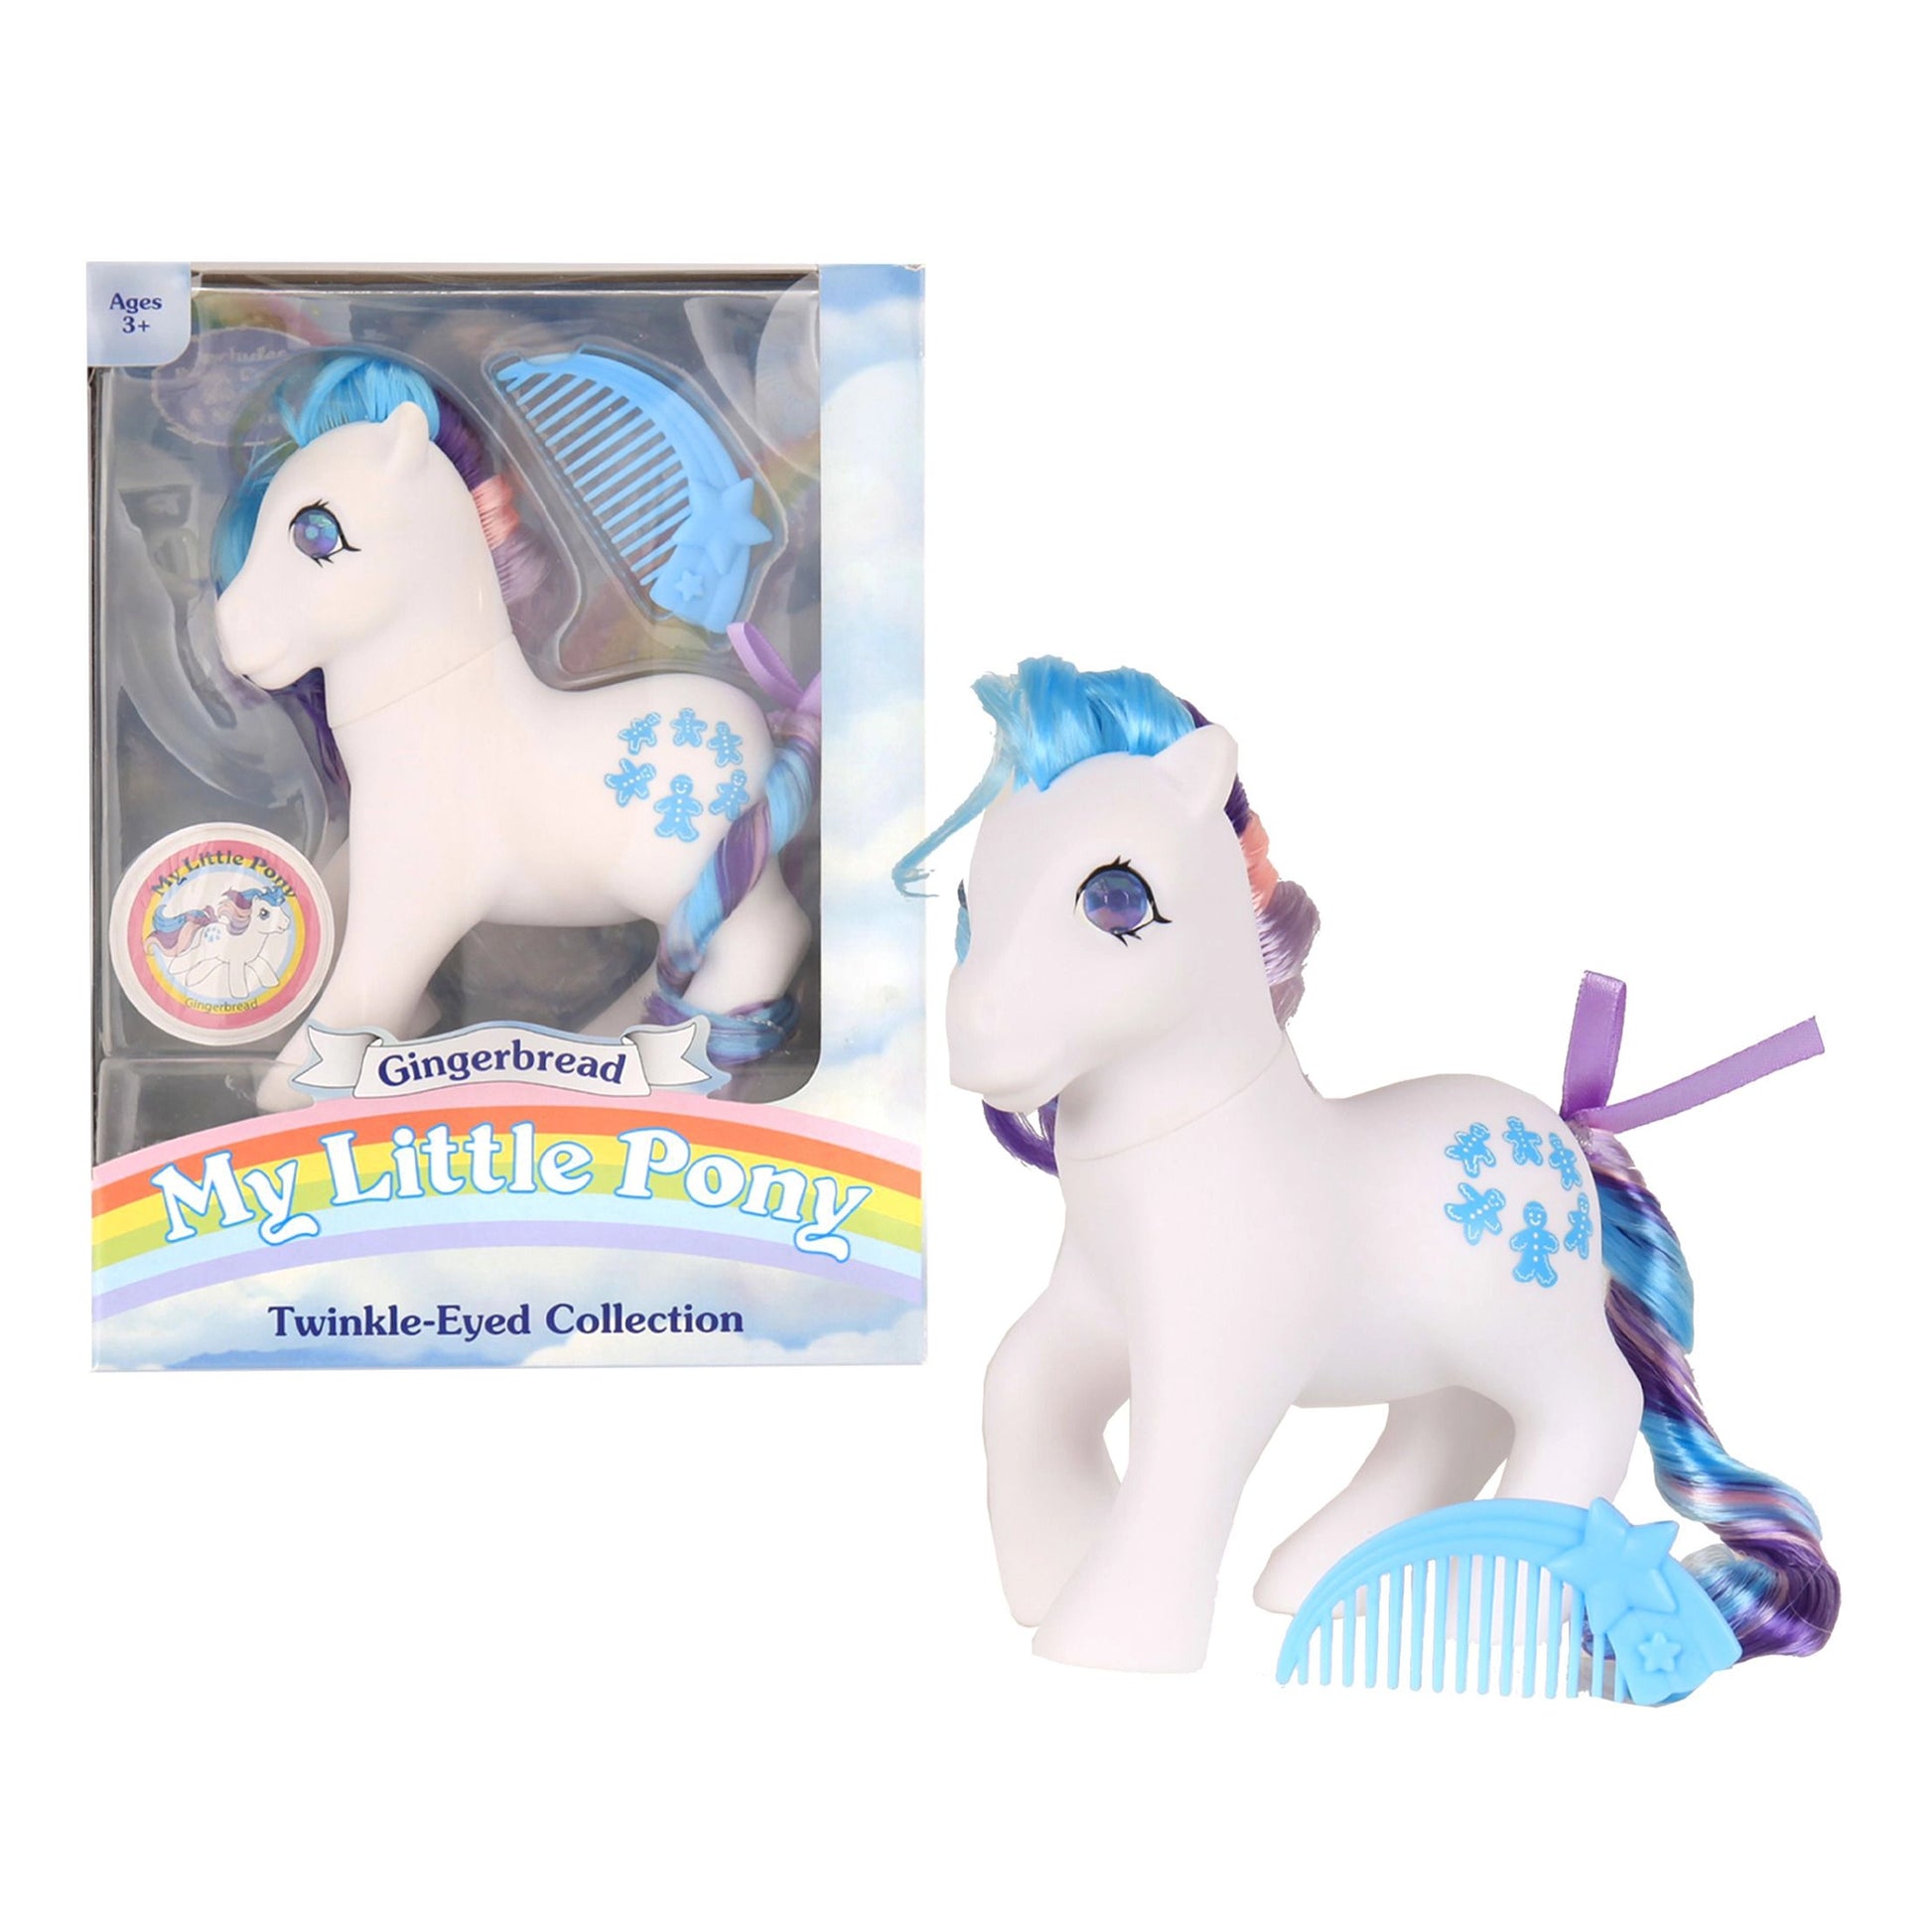 My Little Pony Classics - Gingerbread - ABGee - The Forgotten Toy Shop